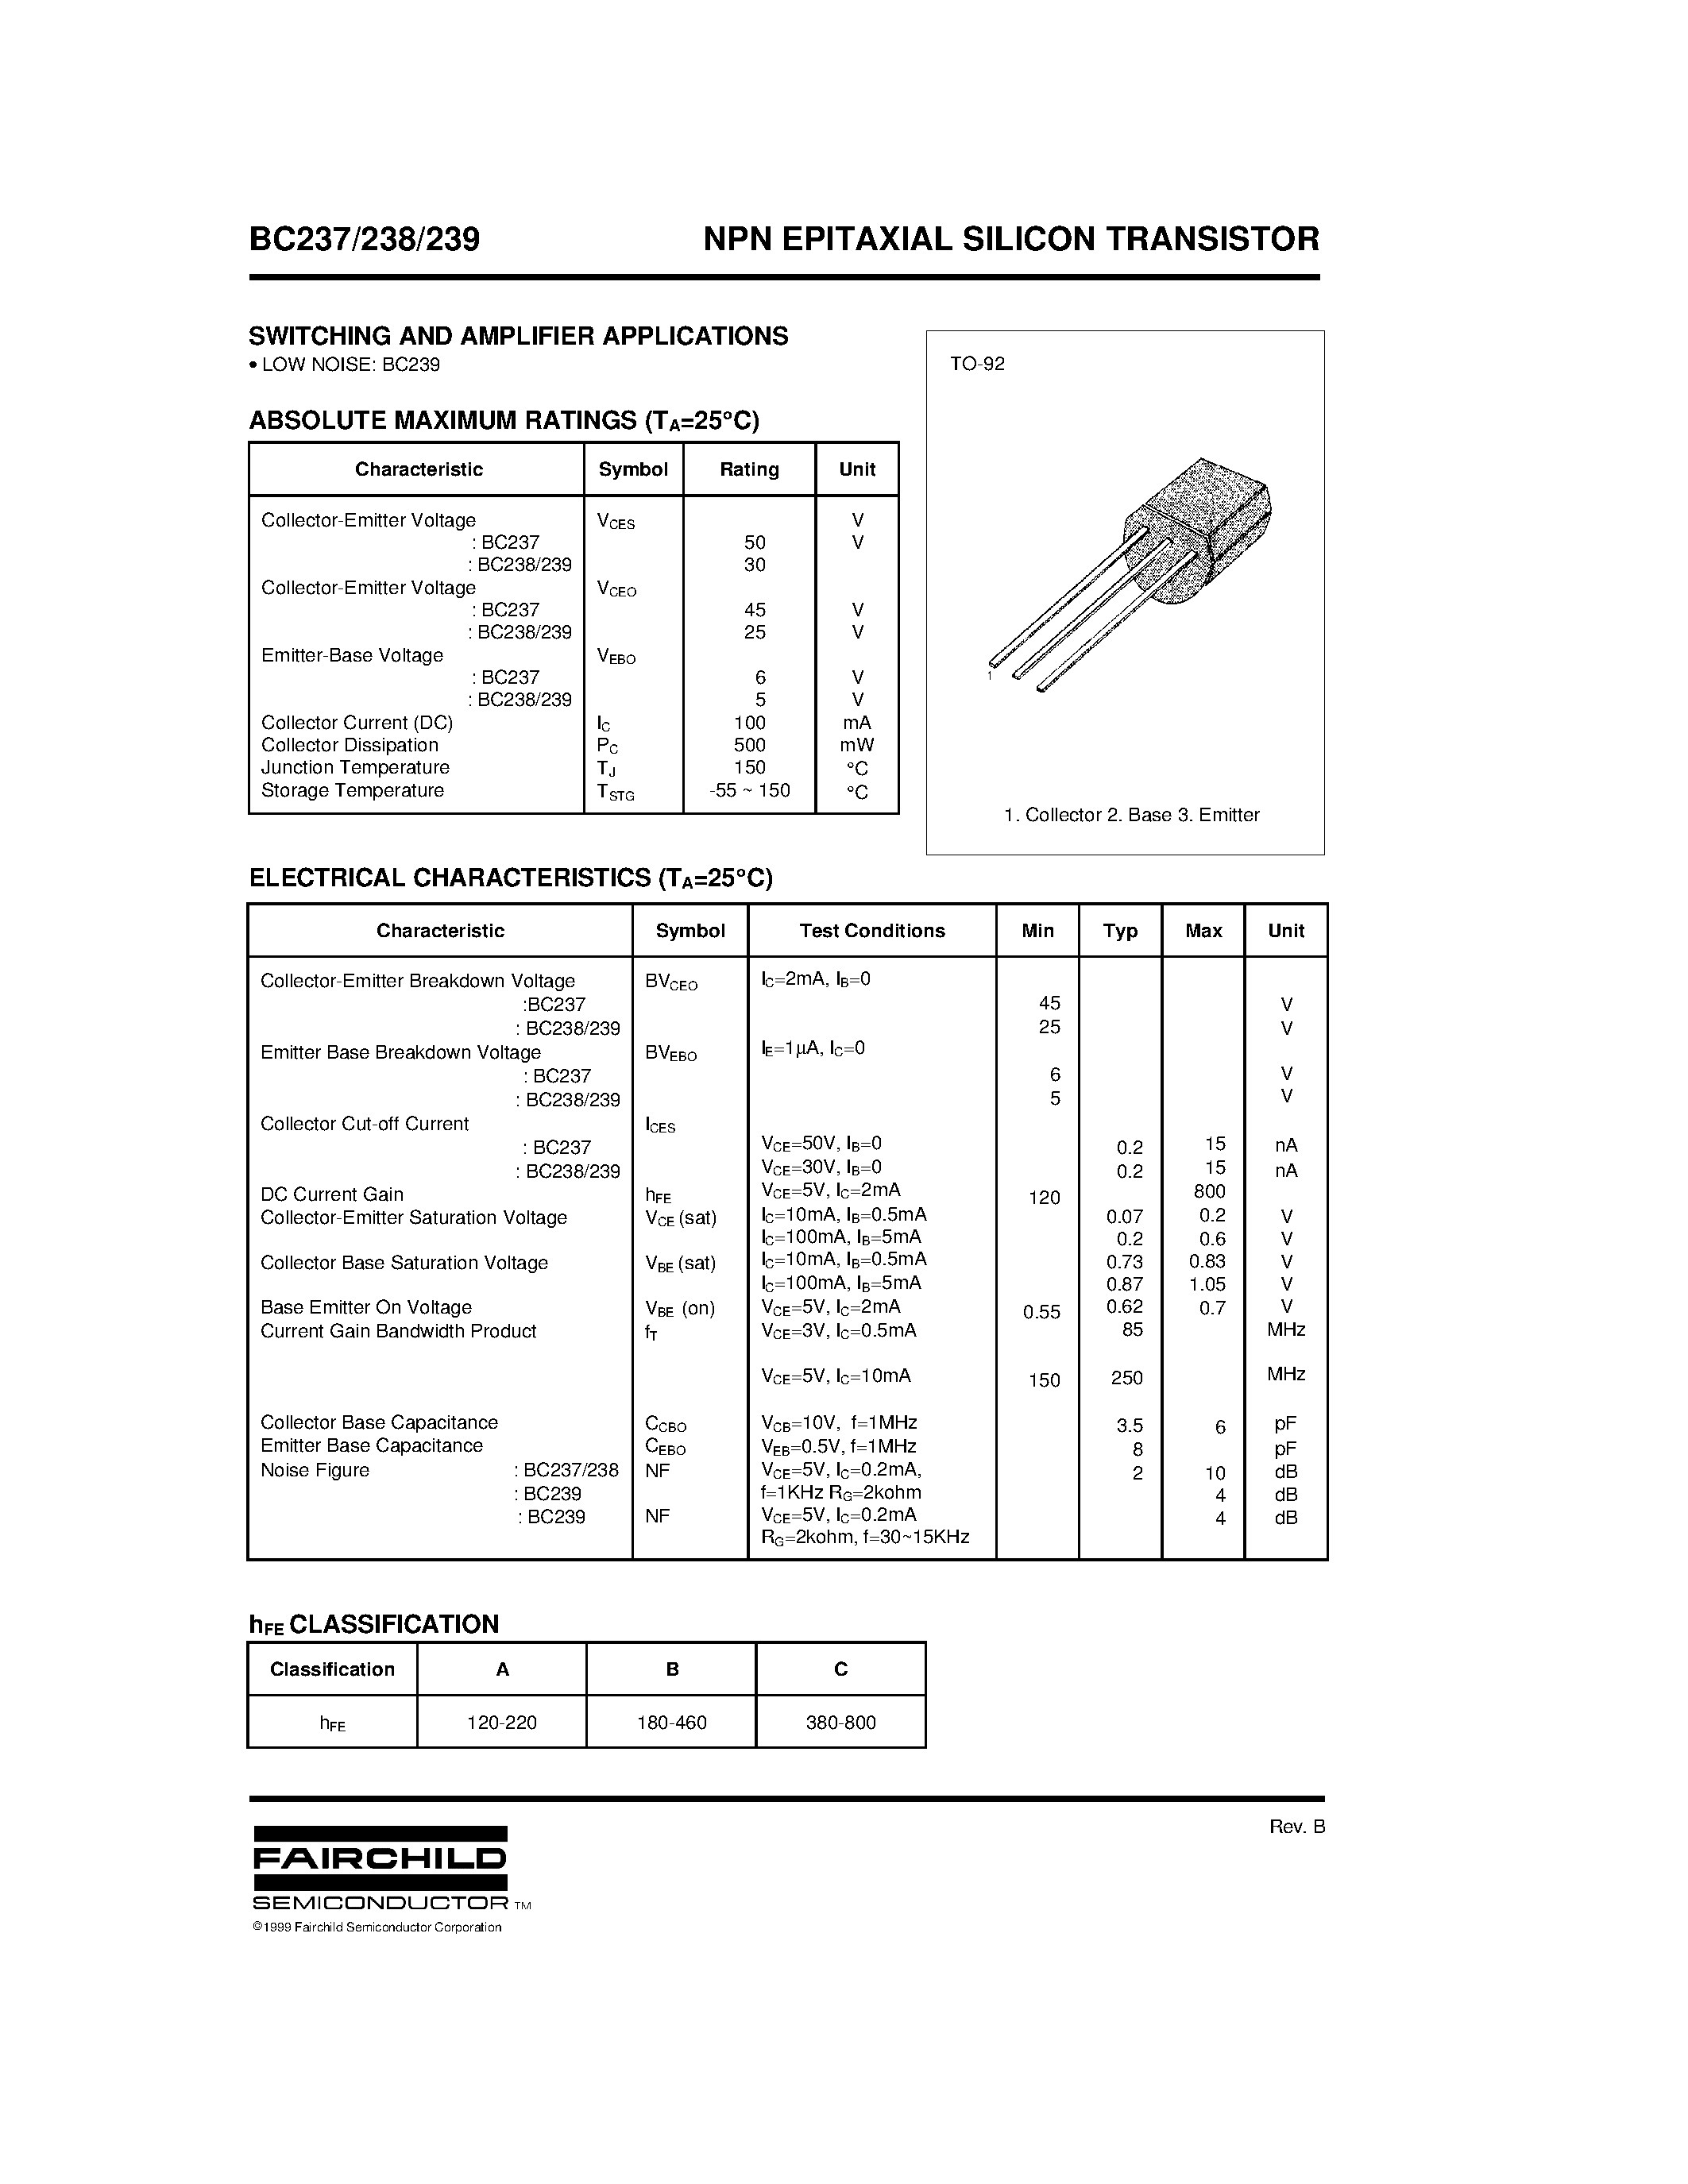 Datasheet BC239 - NPN EPITAXIAL SILICON TRANSISTOR page 1